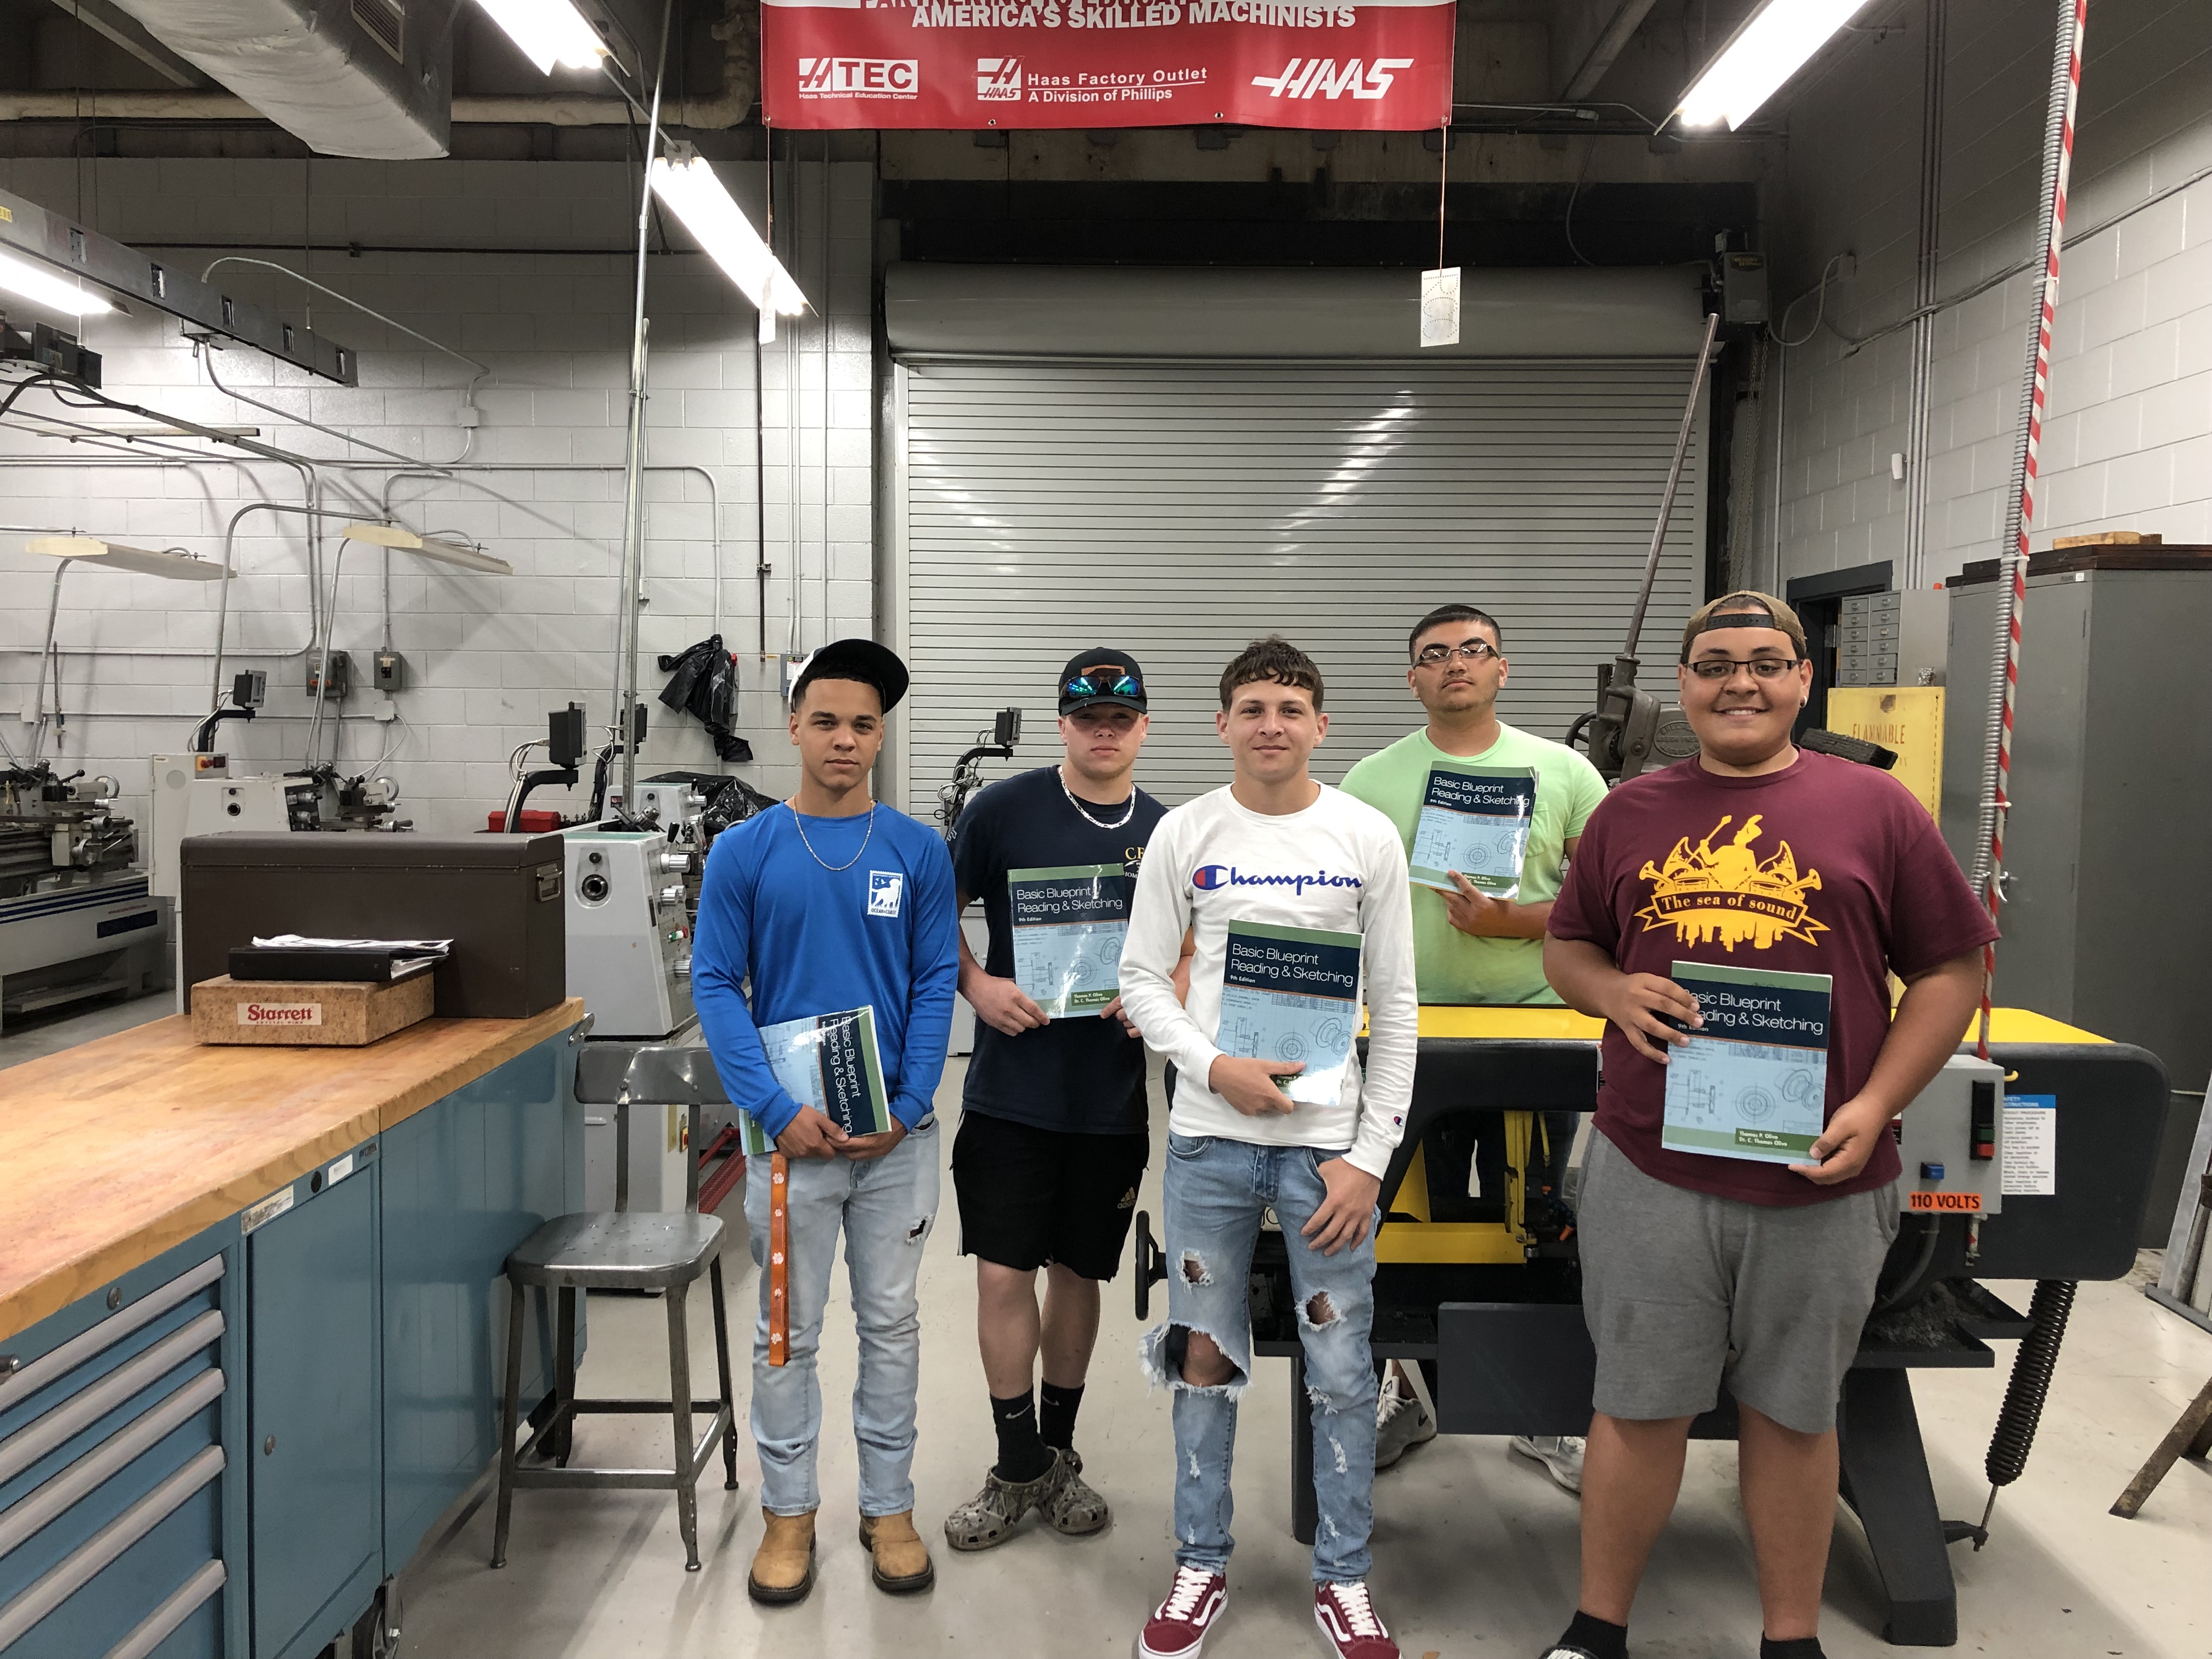 High school students hold the free workbooks they received in the machining program.